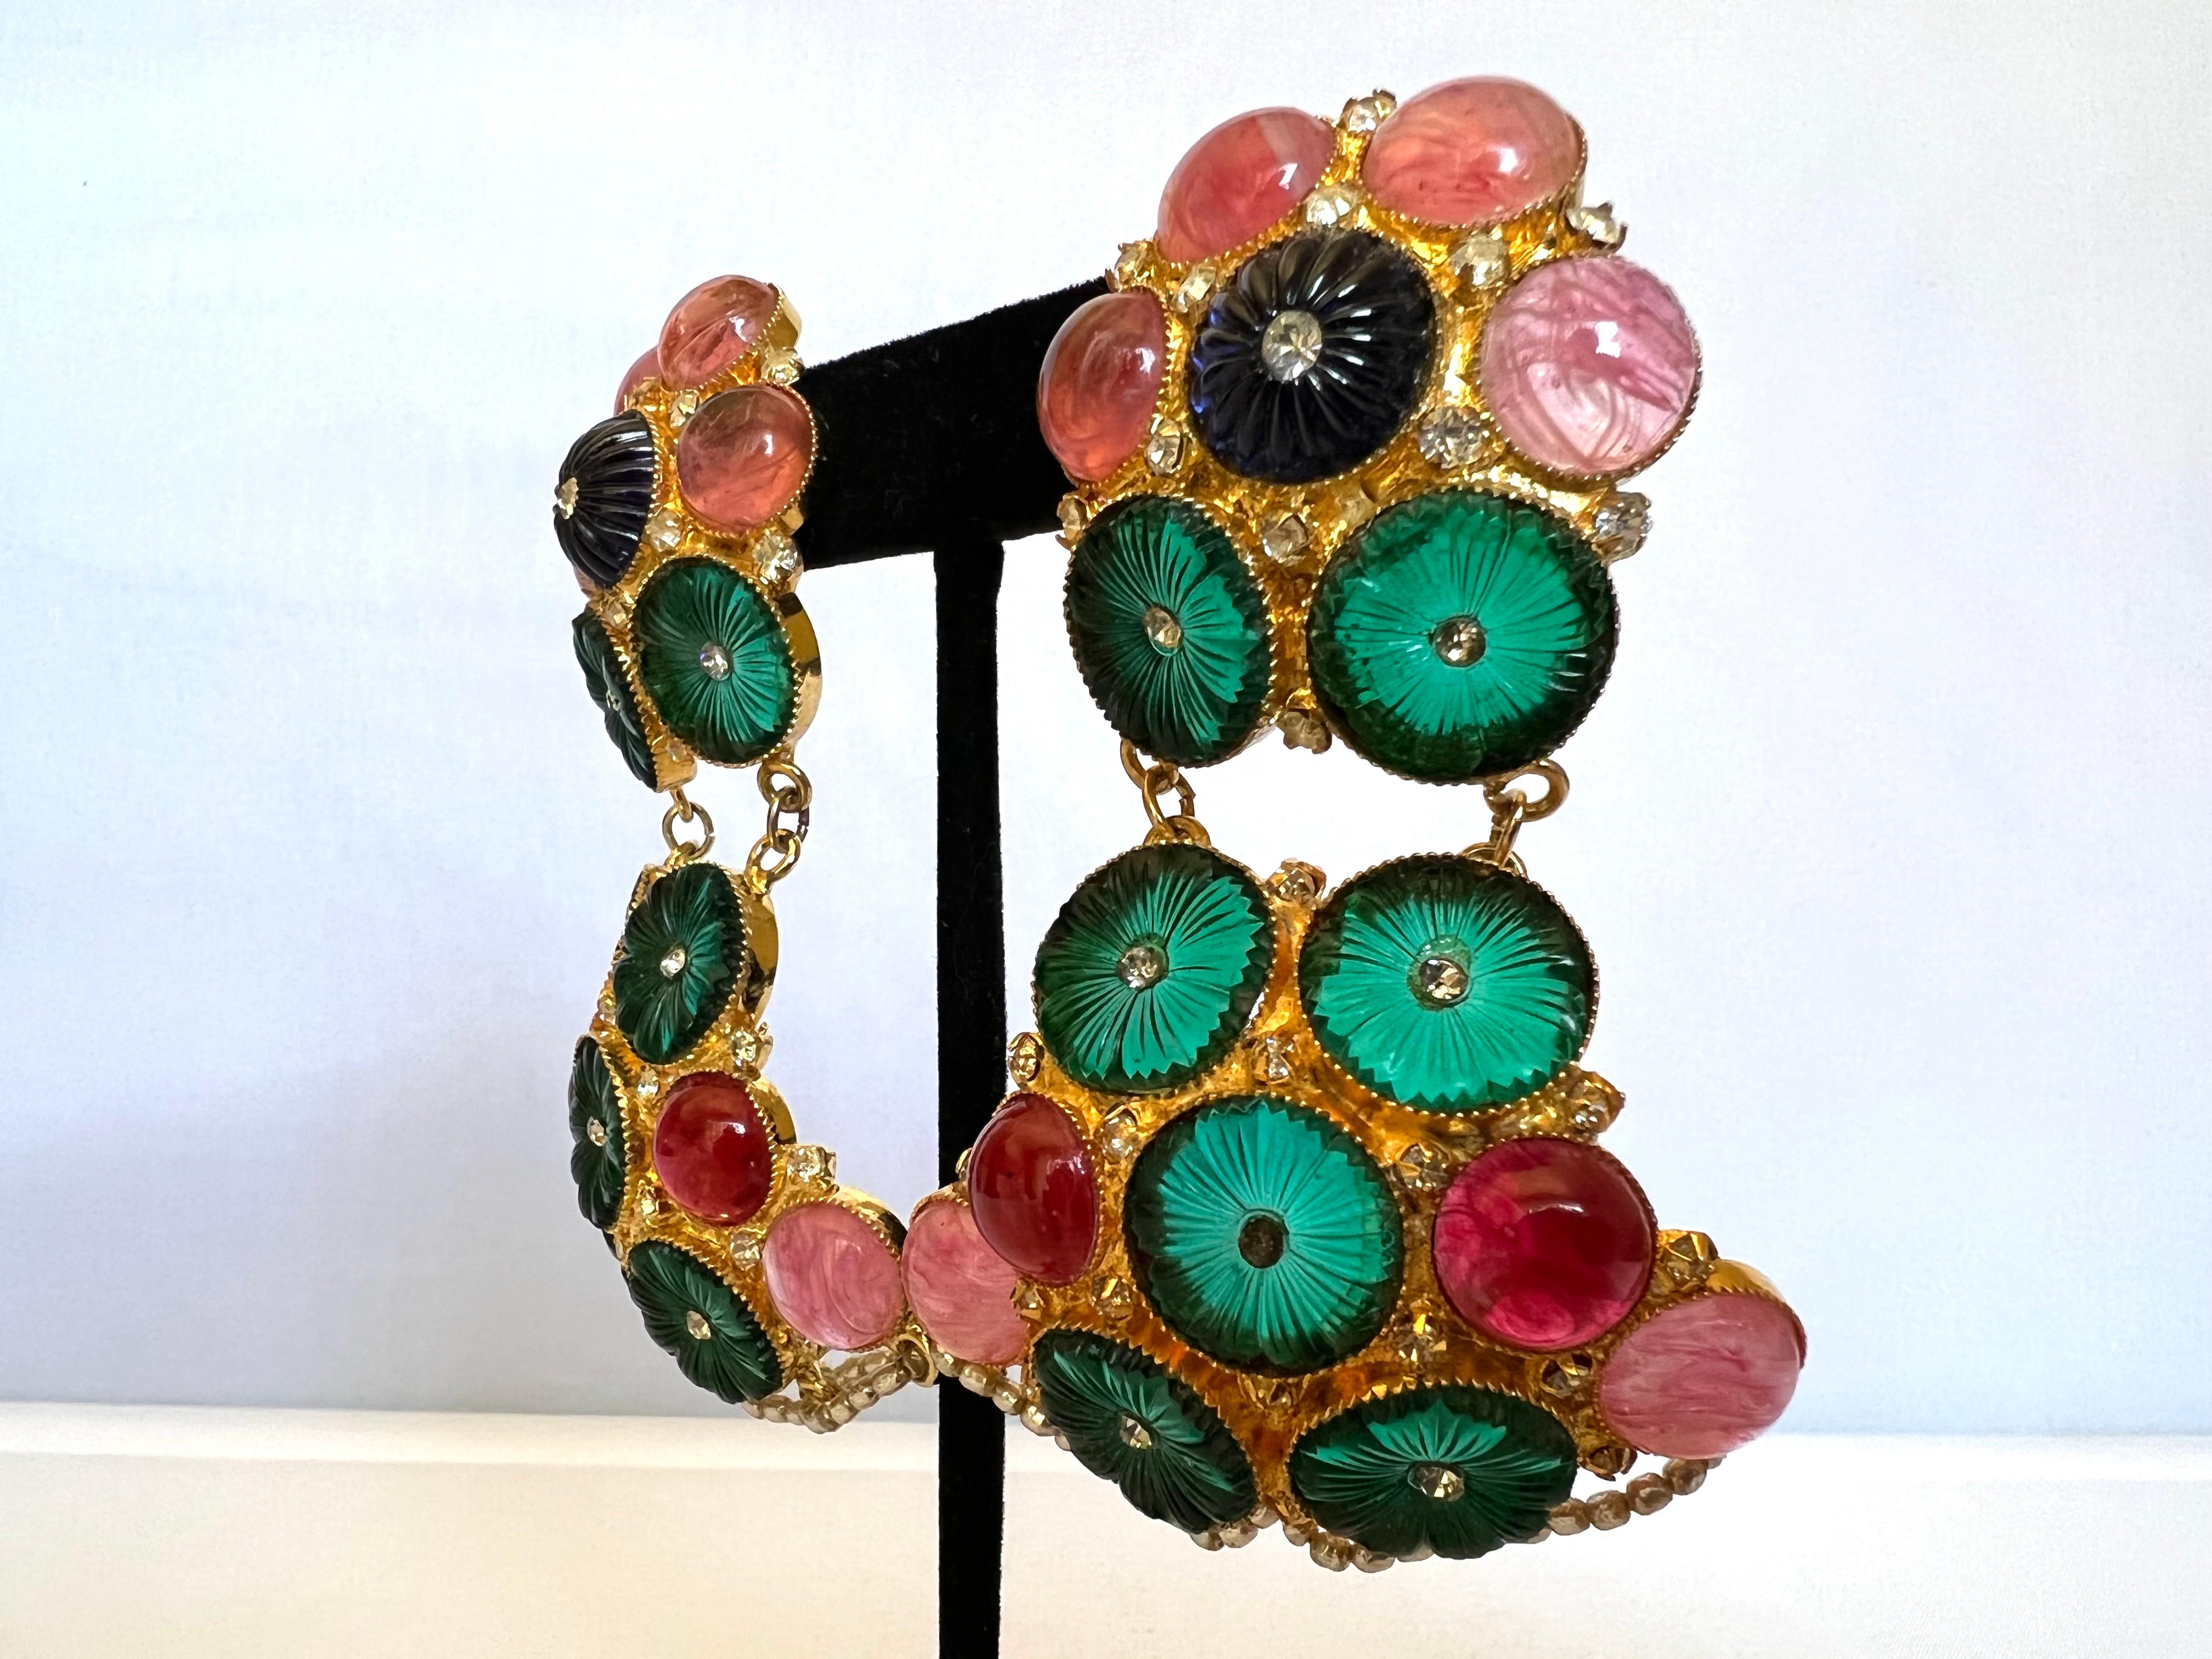 Very rare vintage Robert F. Clark for William de Lillo gold-tone (one of a kind) fruit-salad statement clip-on earrings - adorned by large faux diamante, emerald, sapphire, ruby glass cabochons, and faux nikki pearls. Circa 1975, the earrings have